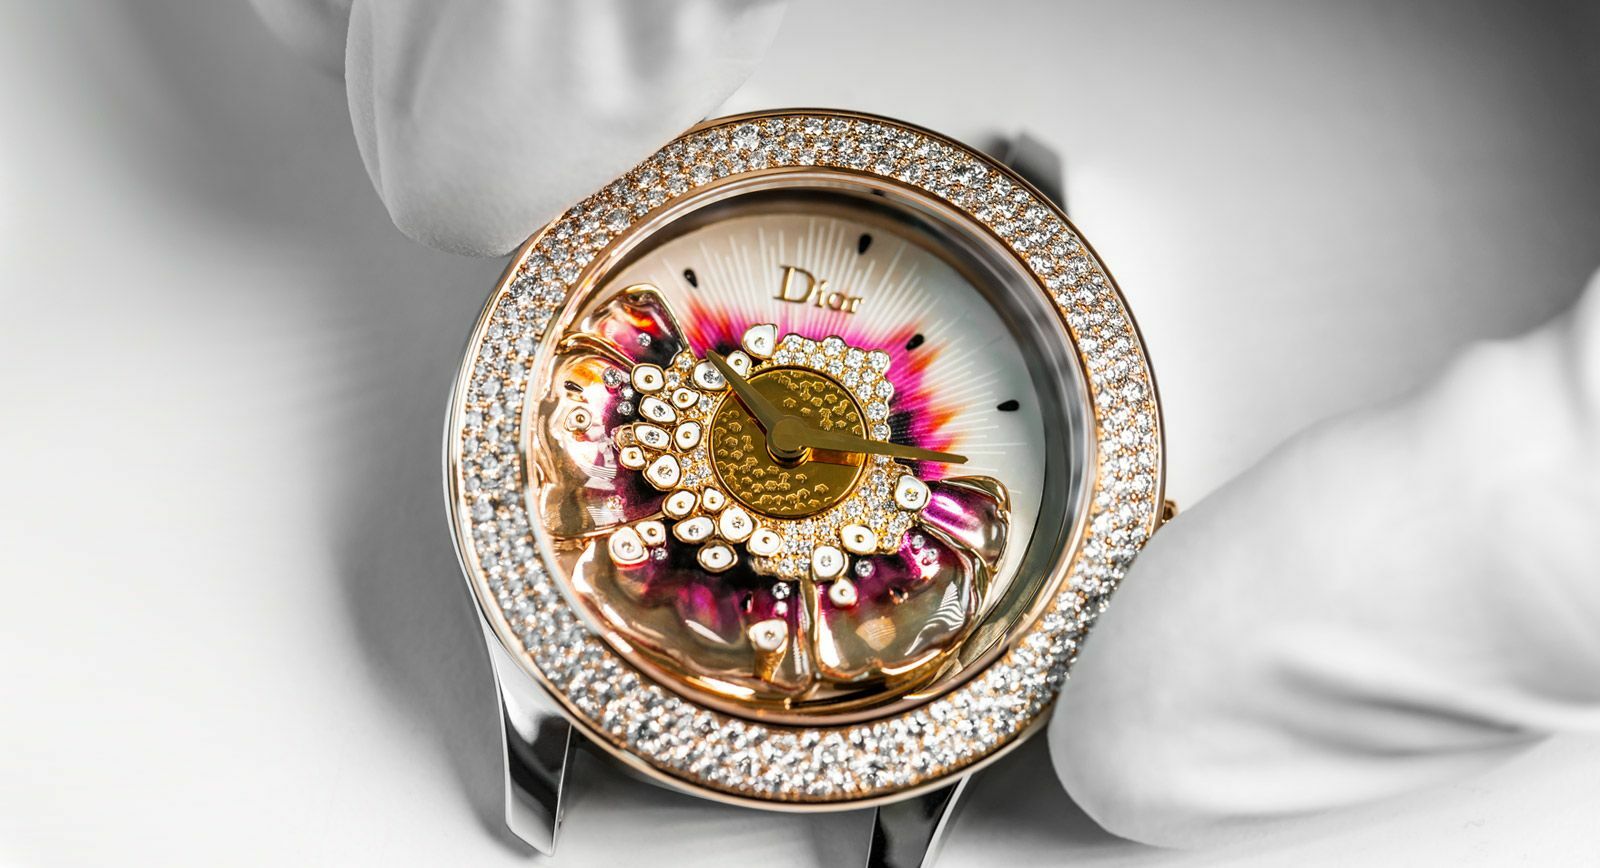 Dior: Latest additions to the 'Dior Grand Bal' watch collection - 'Miss Dior'